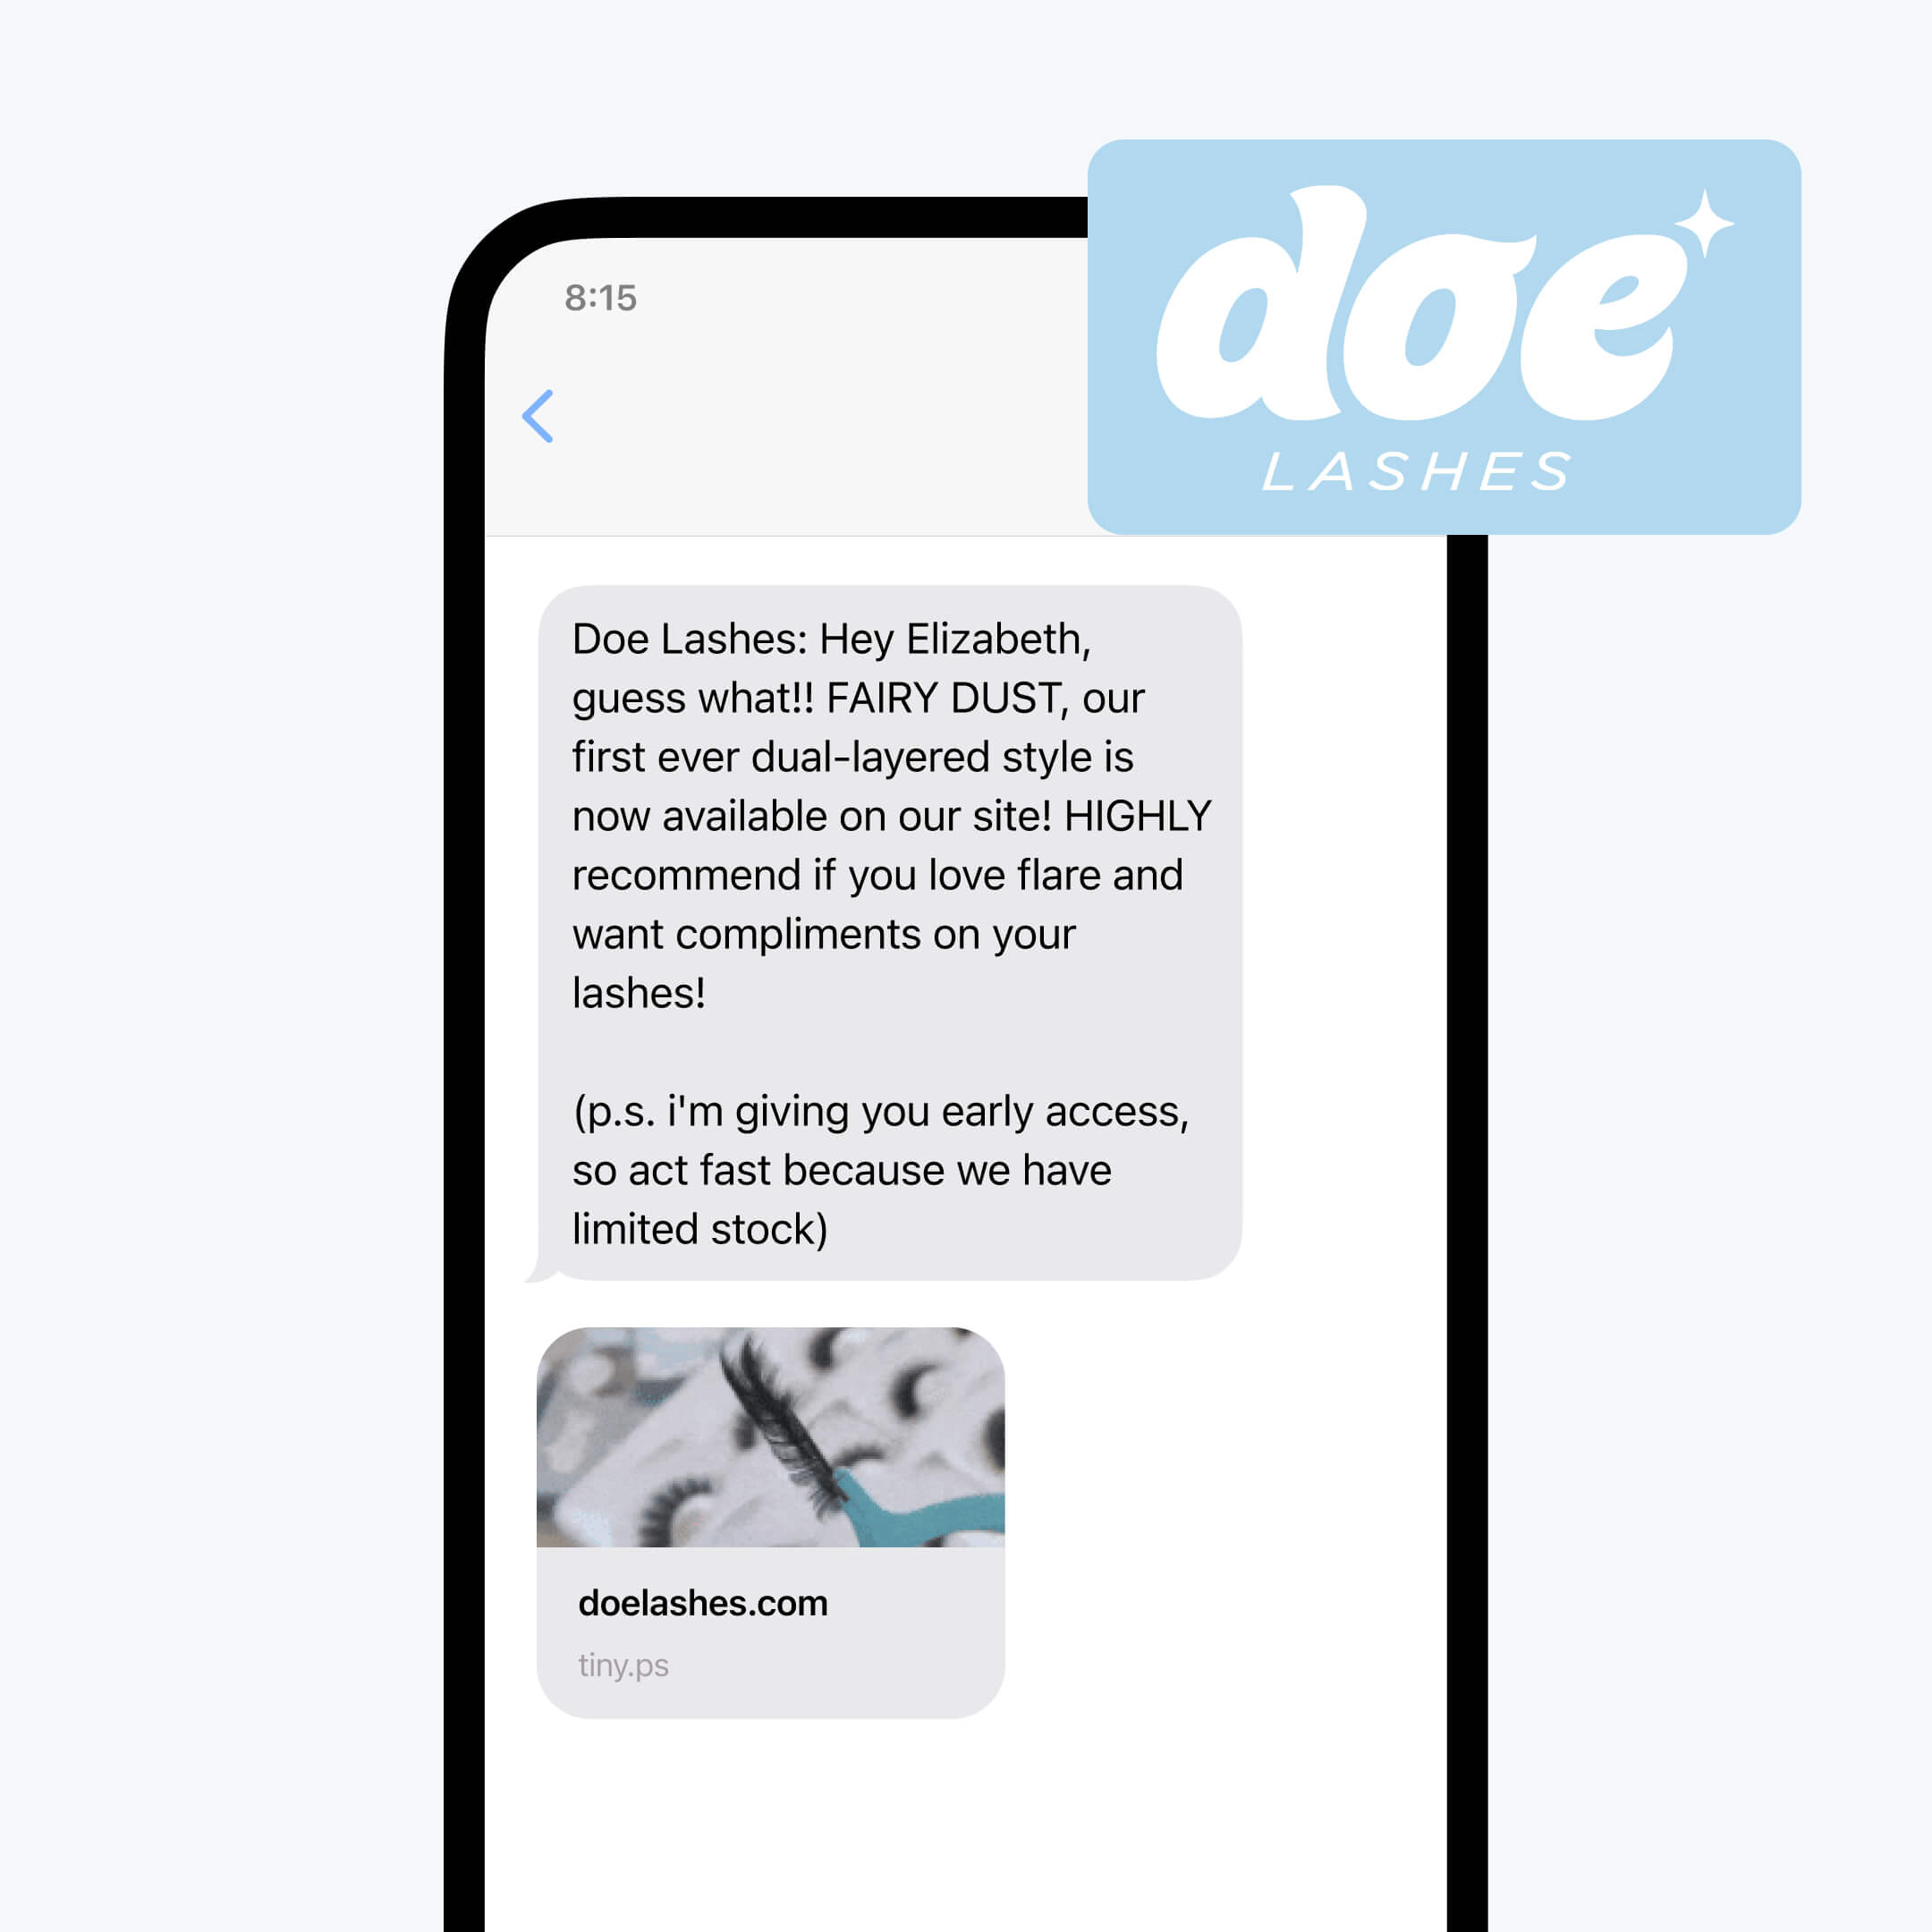 Early access offer promotional text message example from Doe Lashes